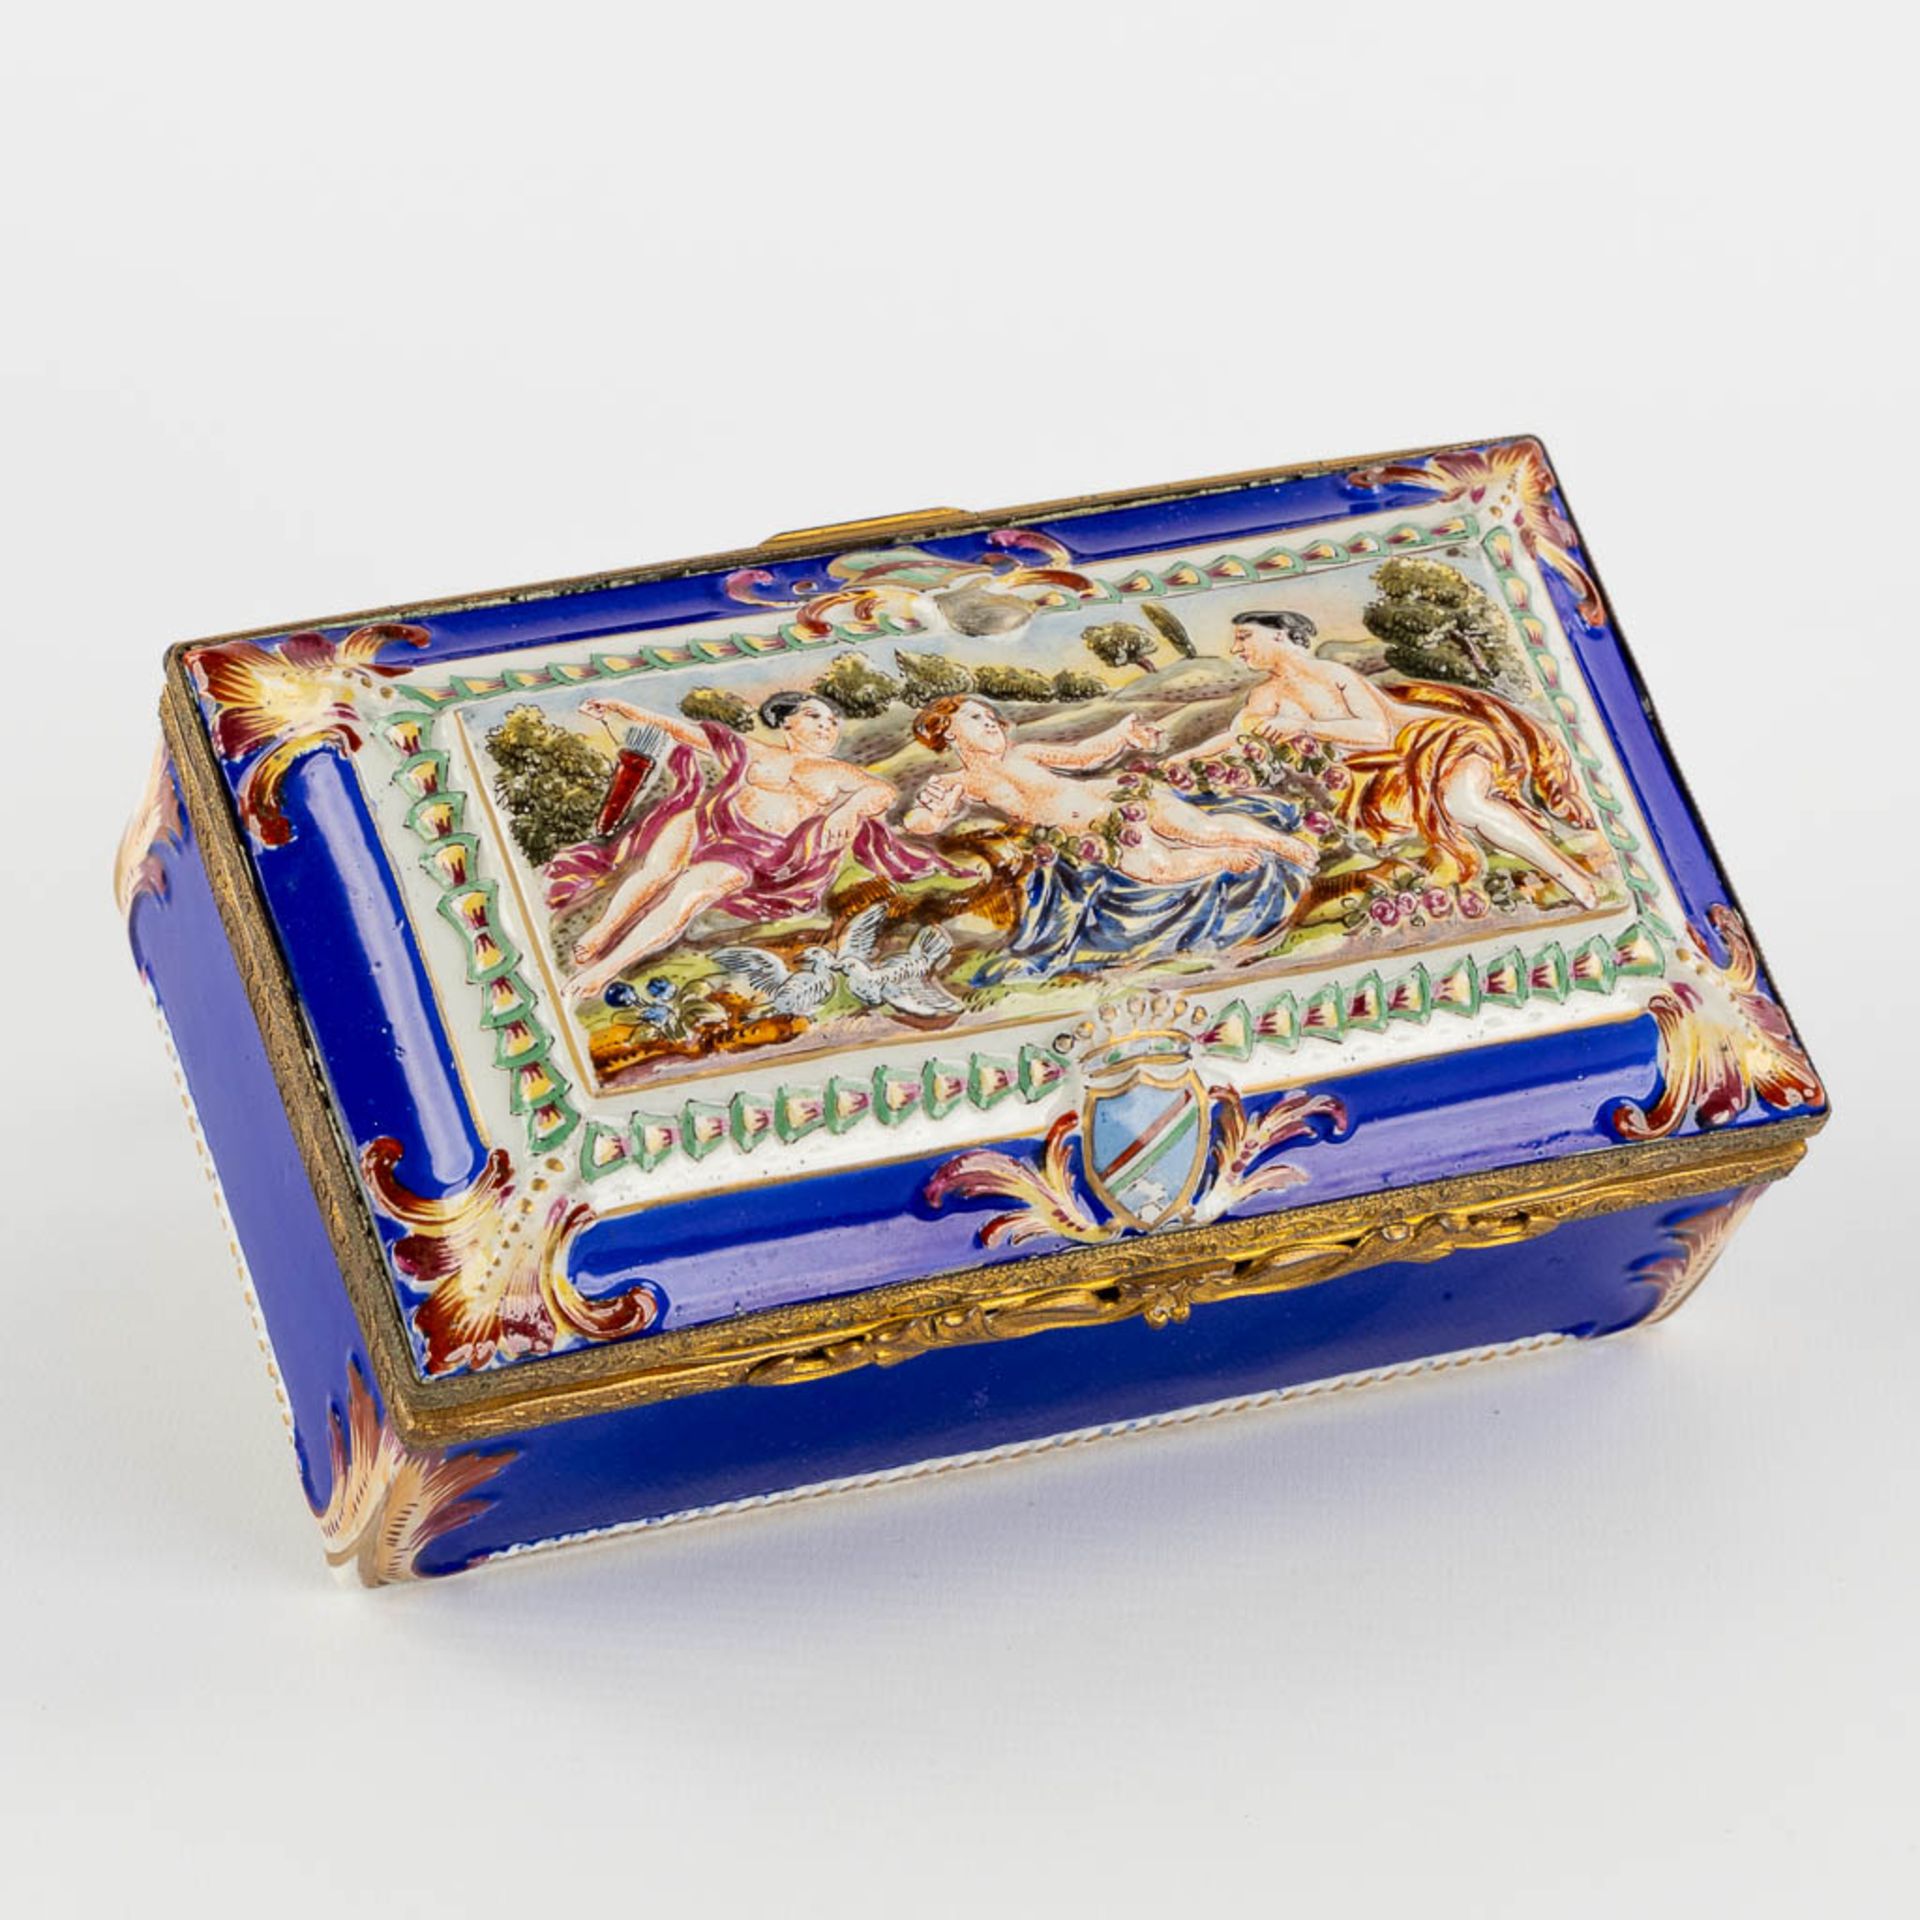 Capodimonte, a finely made porcelain jewellery box. 19th C. (L:10 x W:19 x H:7 cm)